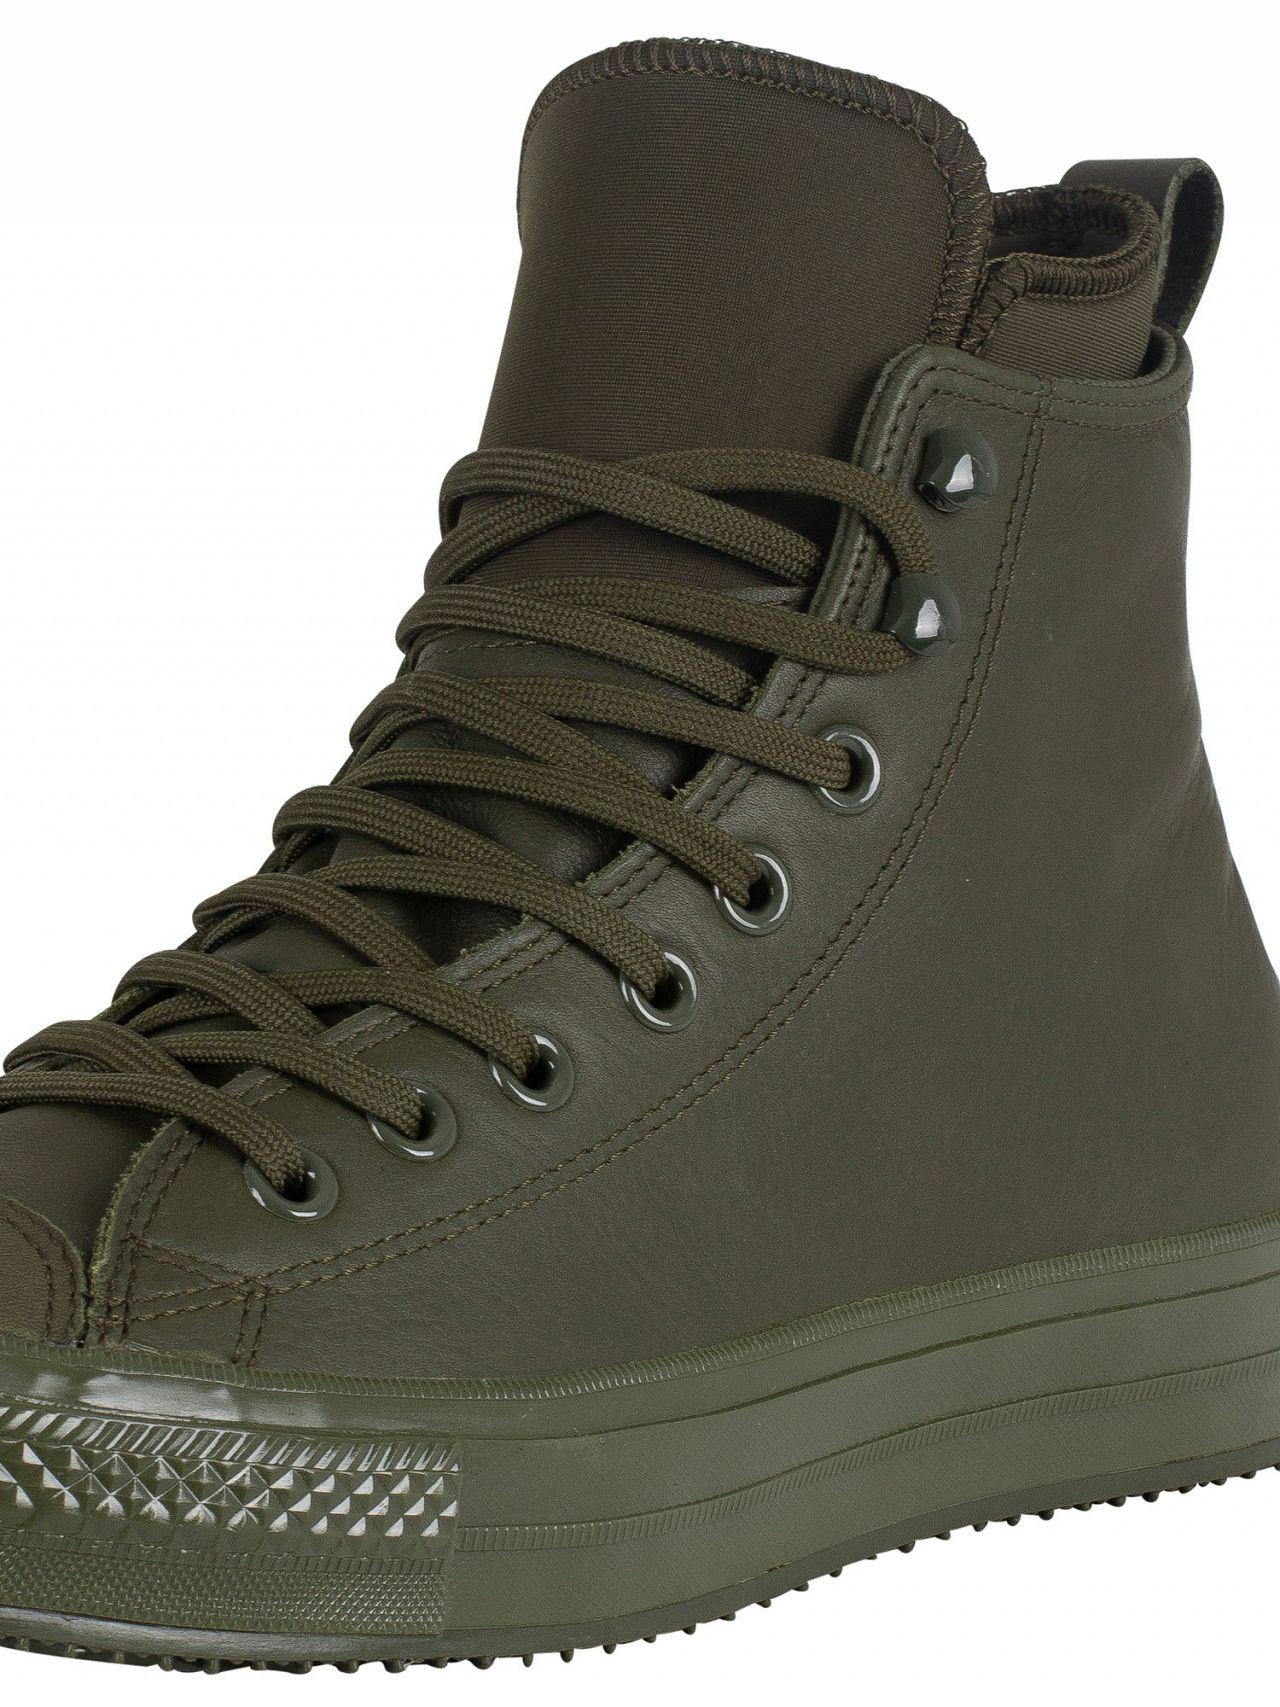 Converse Utility Green Ct All Star Hi Wp Leather Boots for Men | Lyst